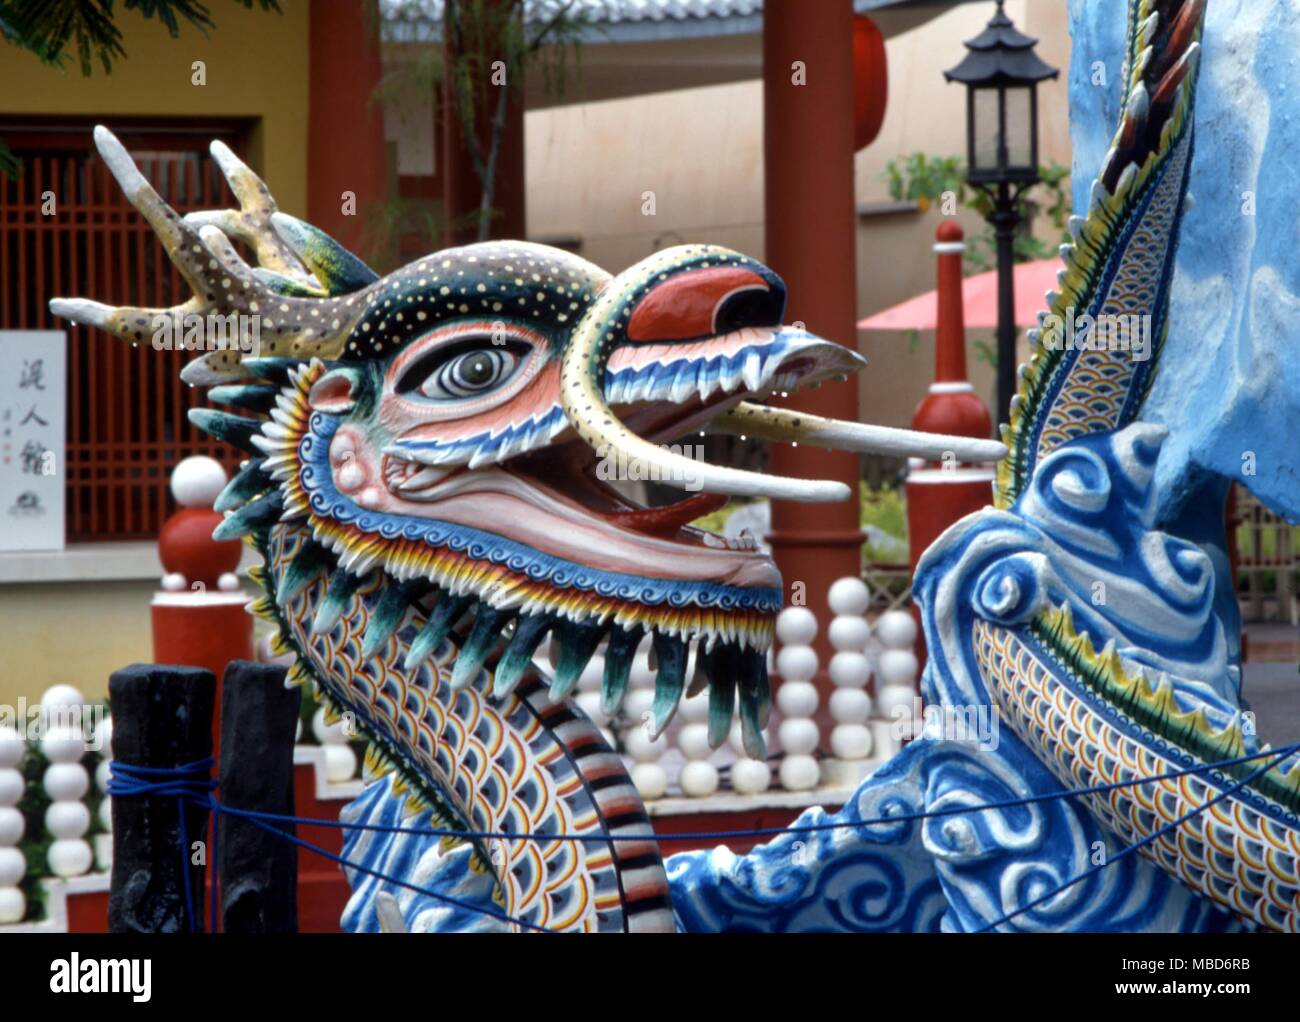 DRAGON - In three dimensional form from the gardens of Haw Par Villa in Singapore Stock Photo